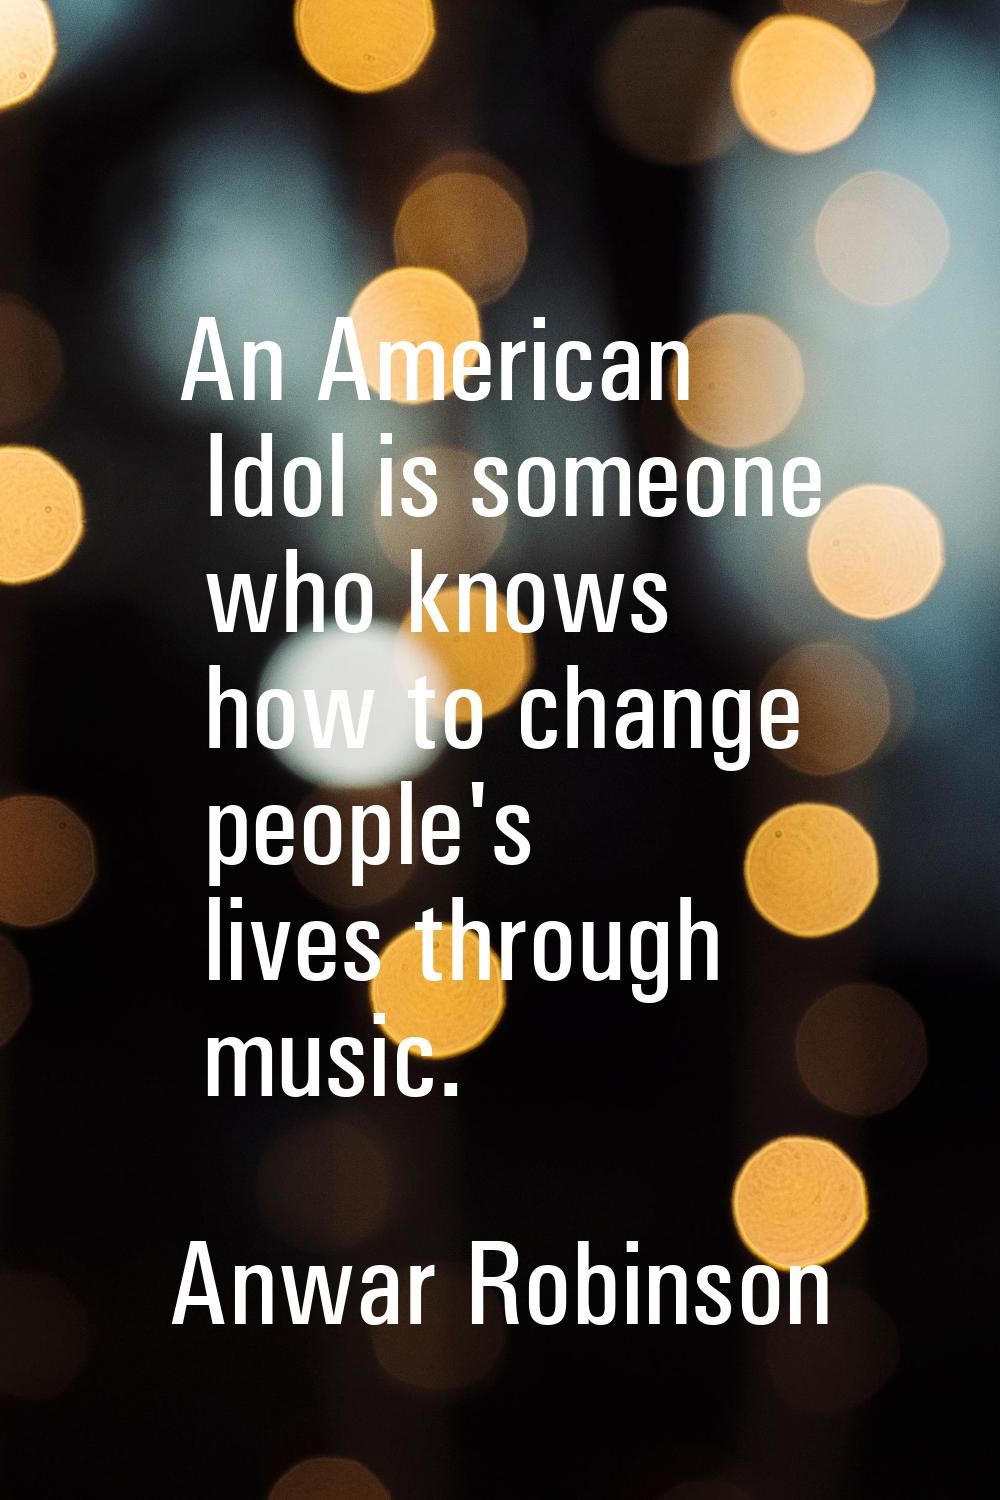 An American Idol is someone who knows how to change people's lives through music.